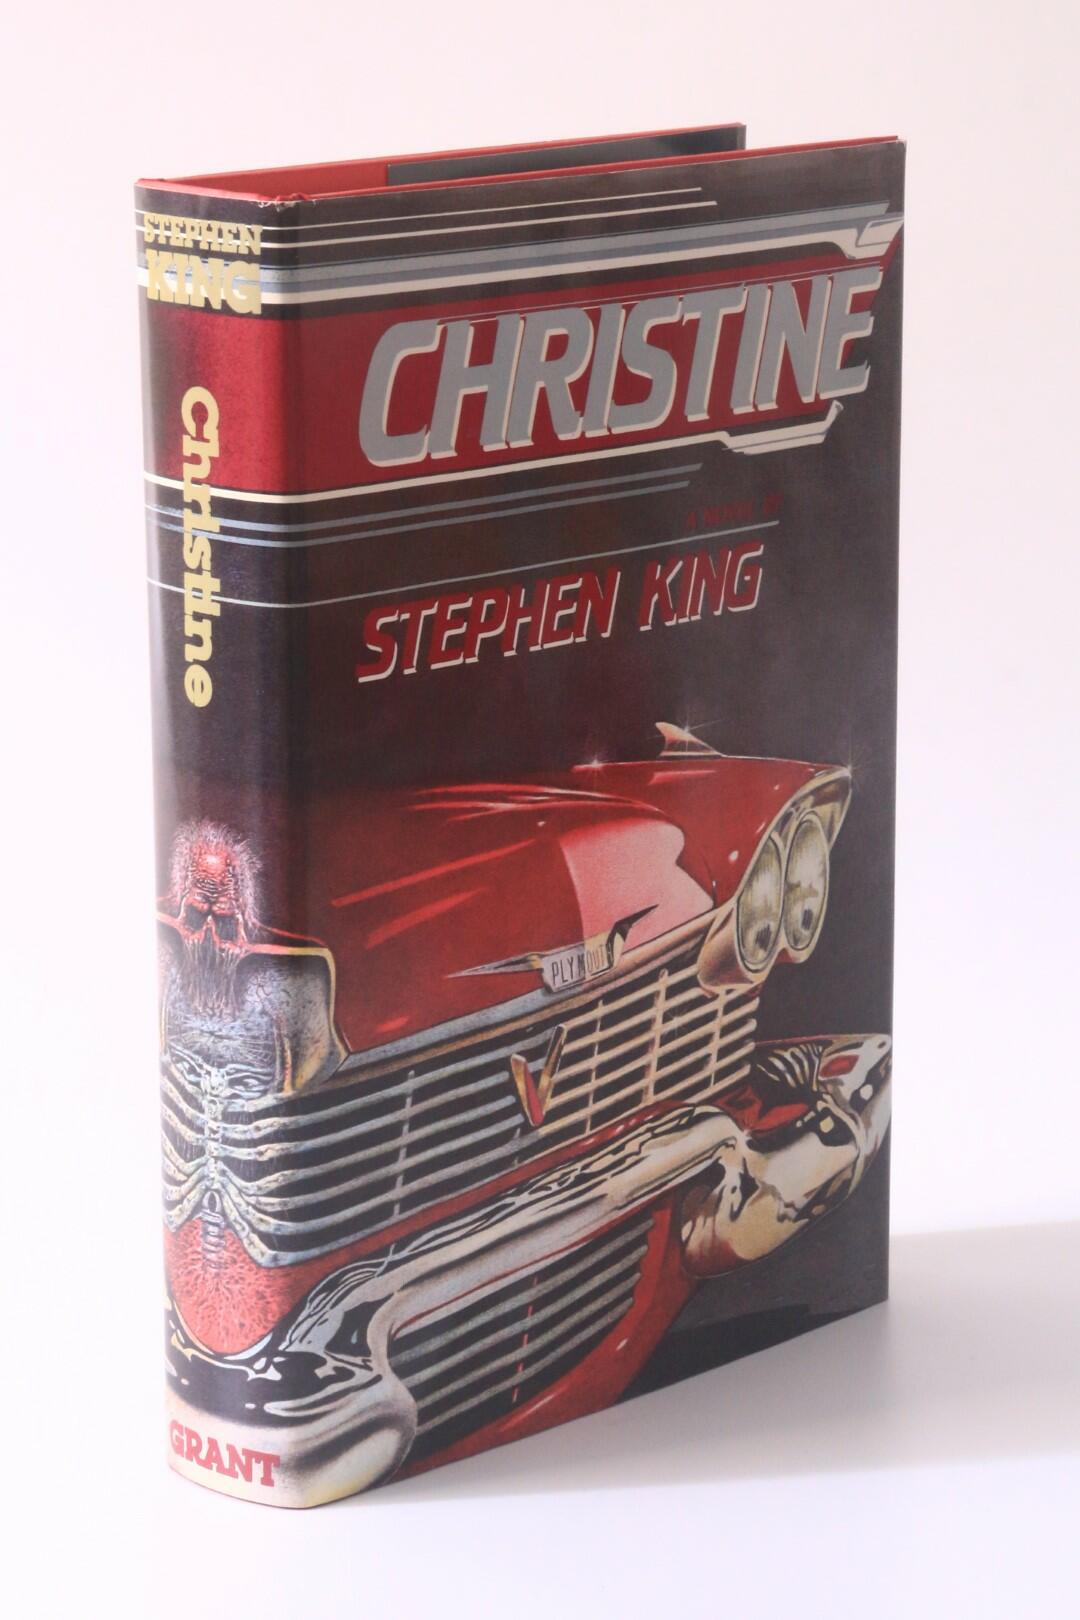 Stephen King - Christine - Donald M. Grant, 1983, Limited Edition.  Signed